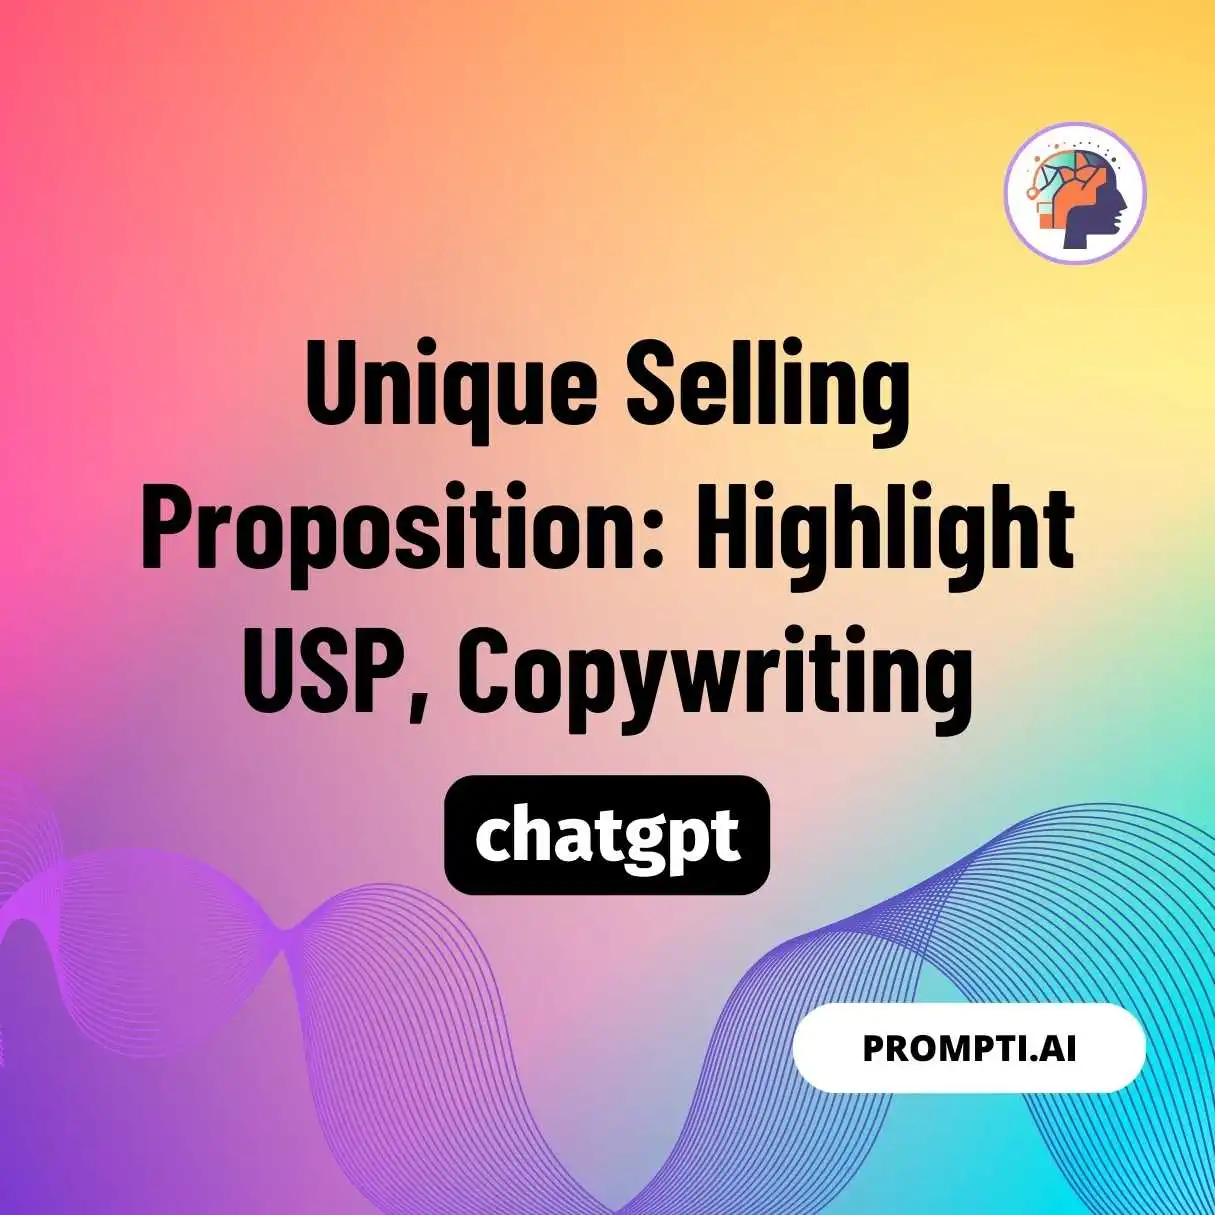 Unique Selling Proposition: Highlight USP, Copywriting